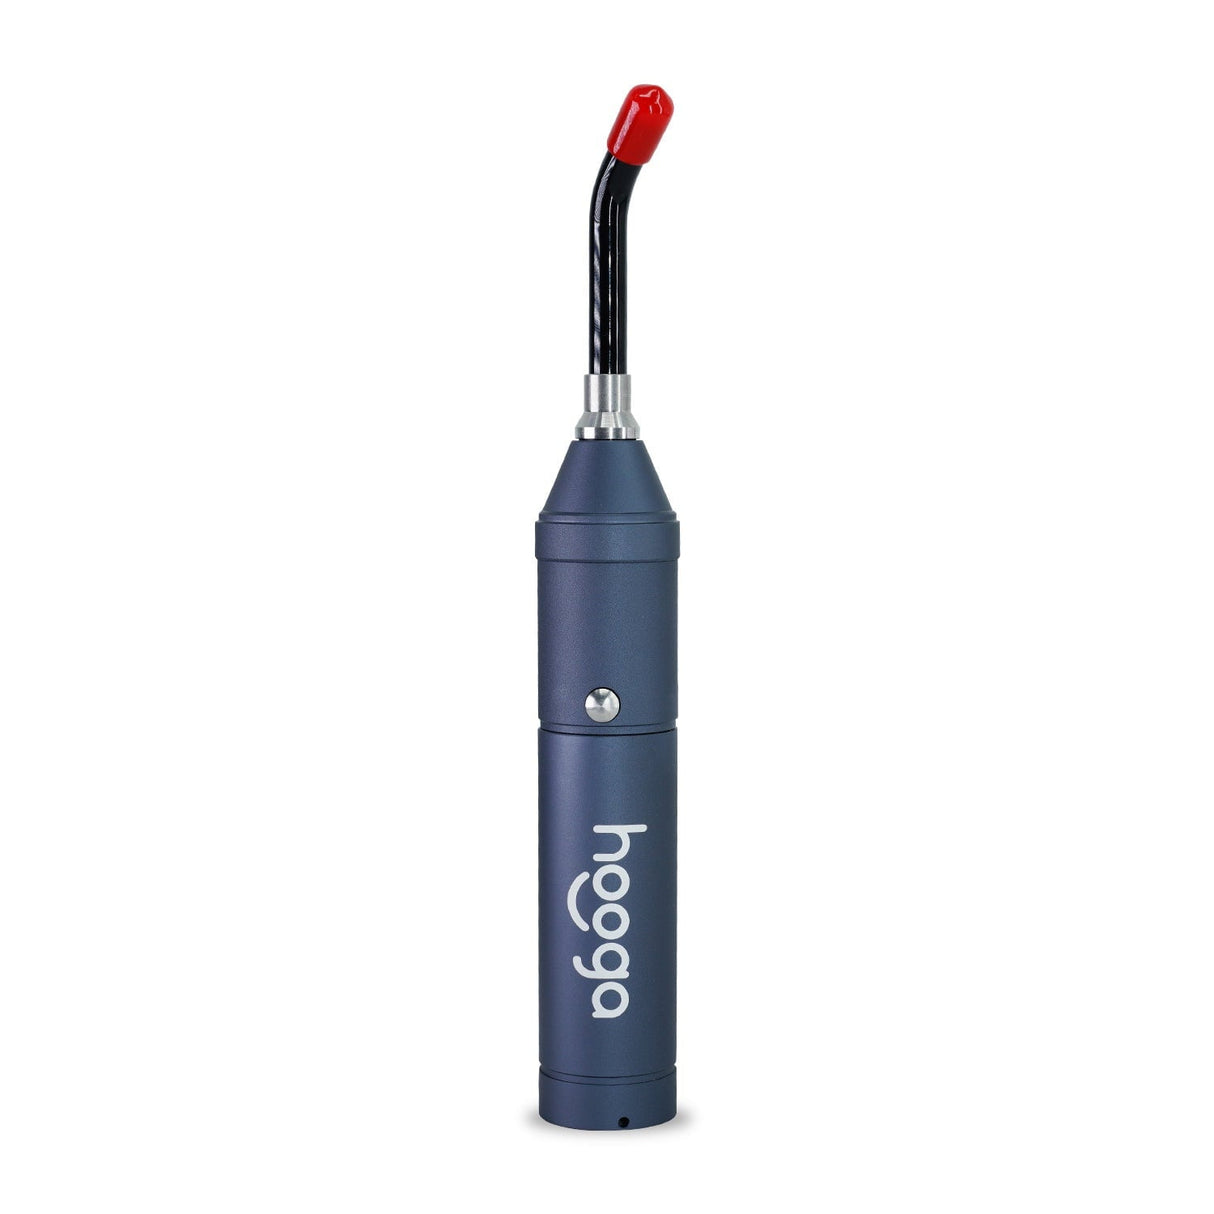 Hooga Torch Red Light Therapy Devices